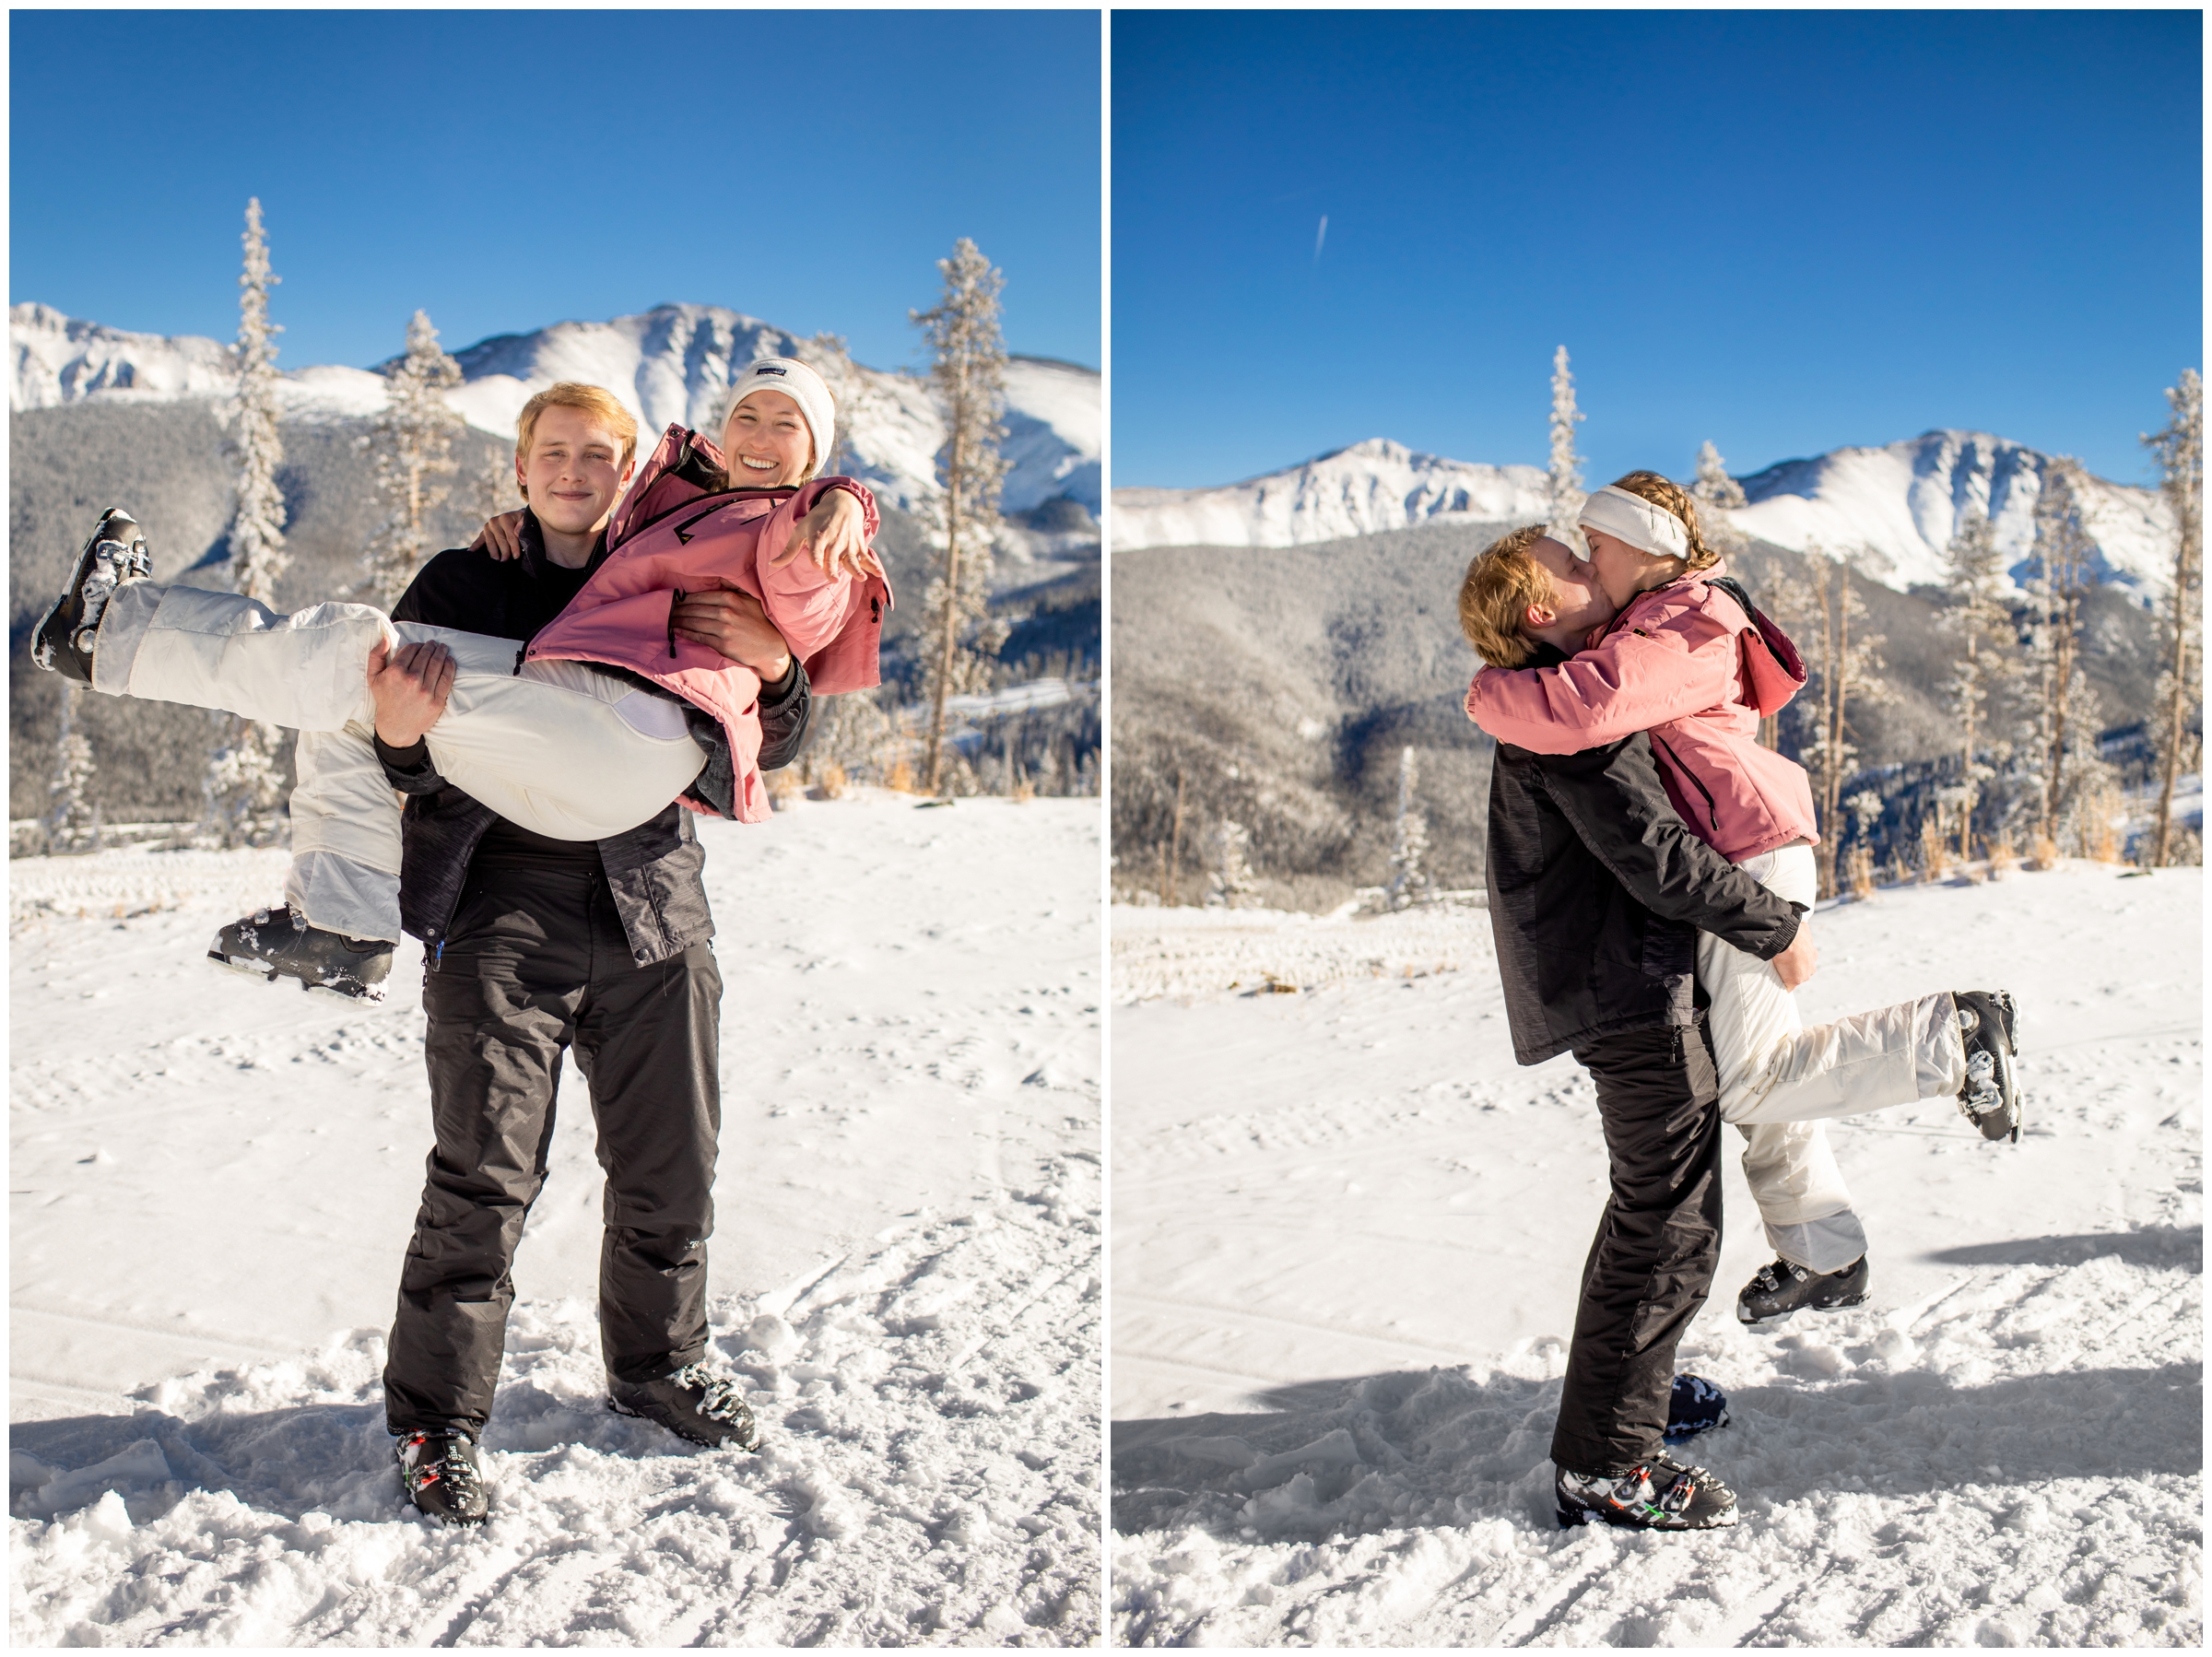 snowy Winter Park ski resort proposal and engagement pictures 